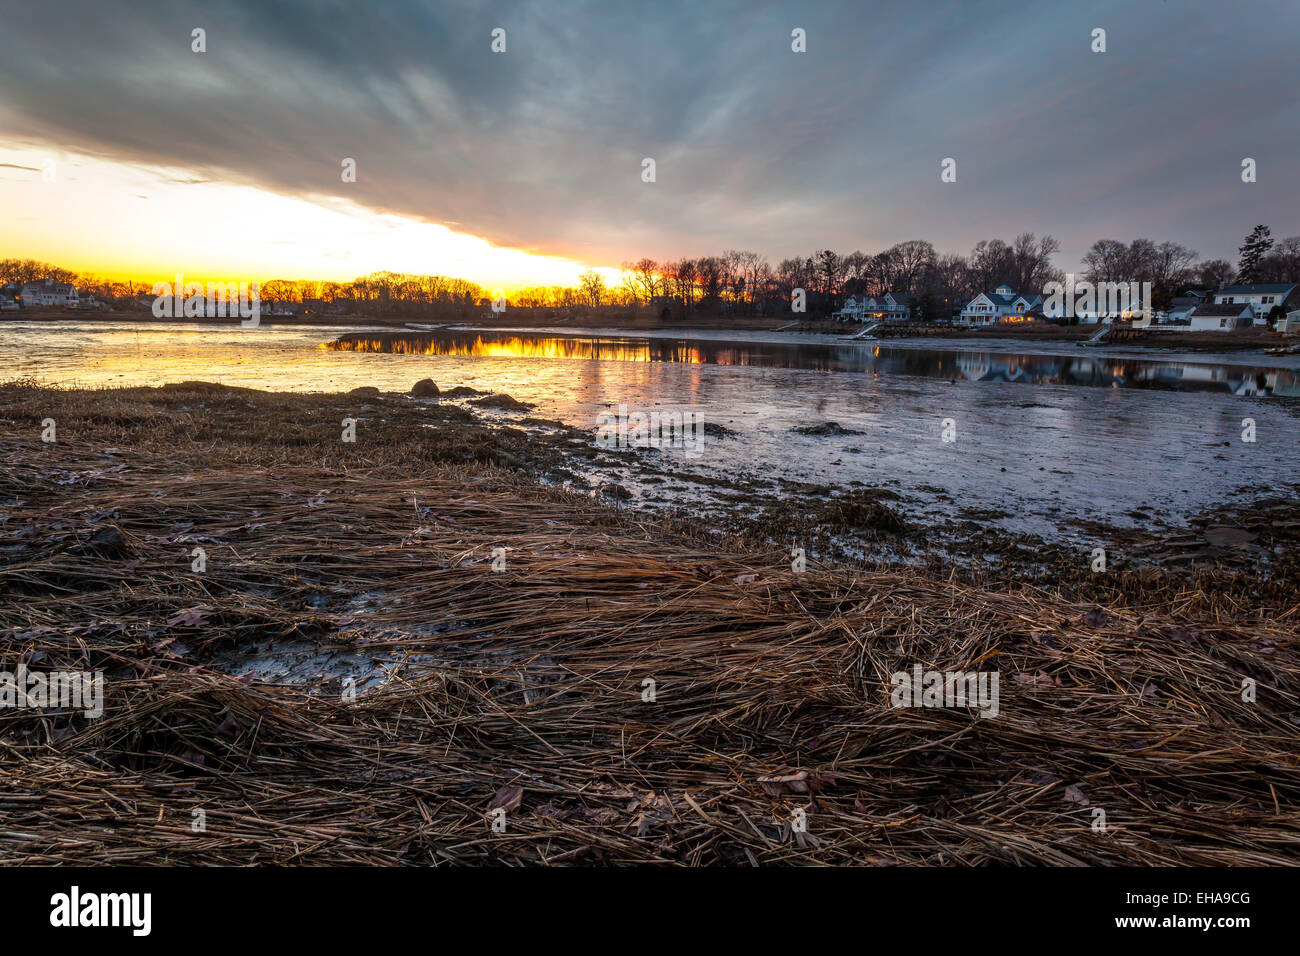 An orange sunset over grassy and muddy waters at low tide. Stock Photo